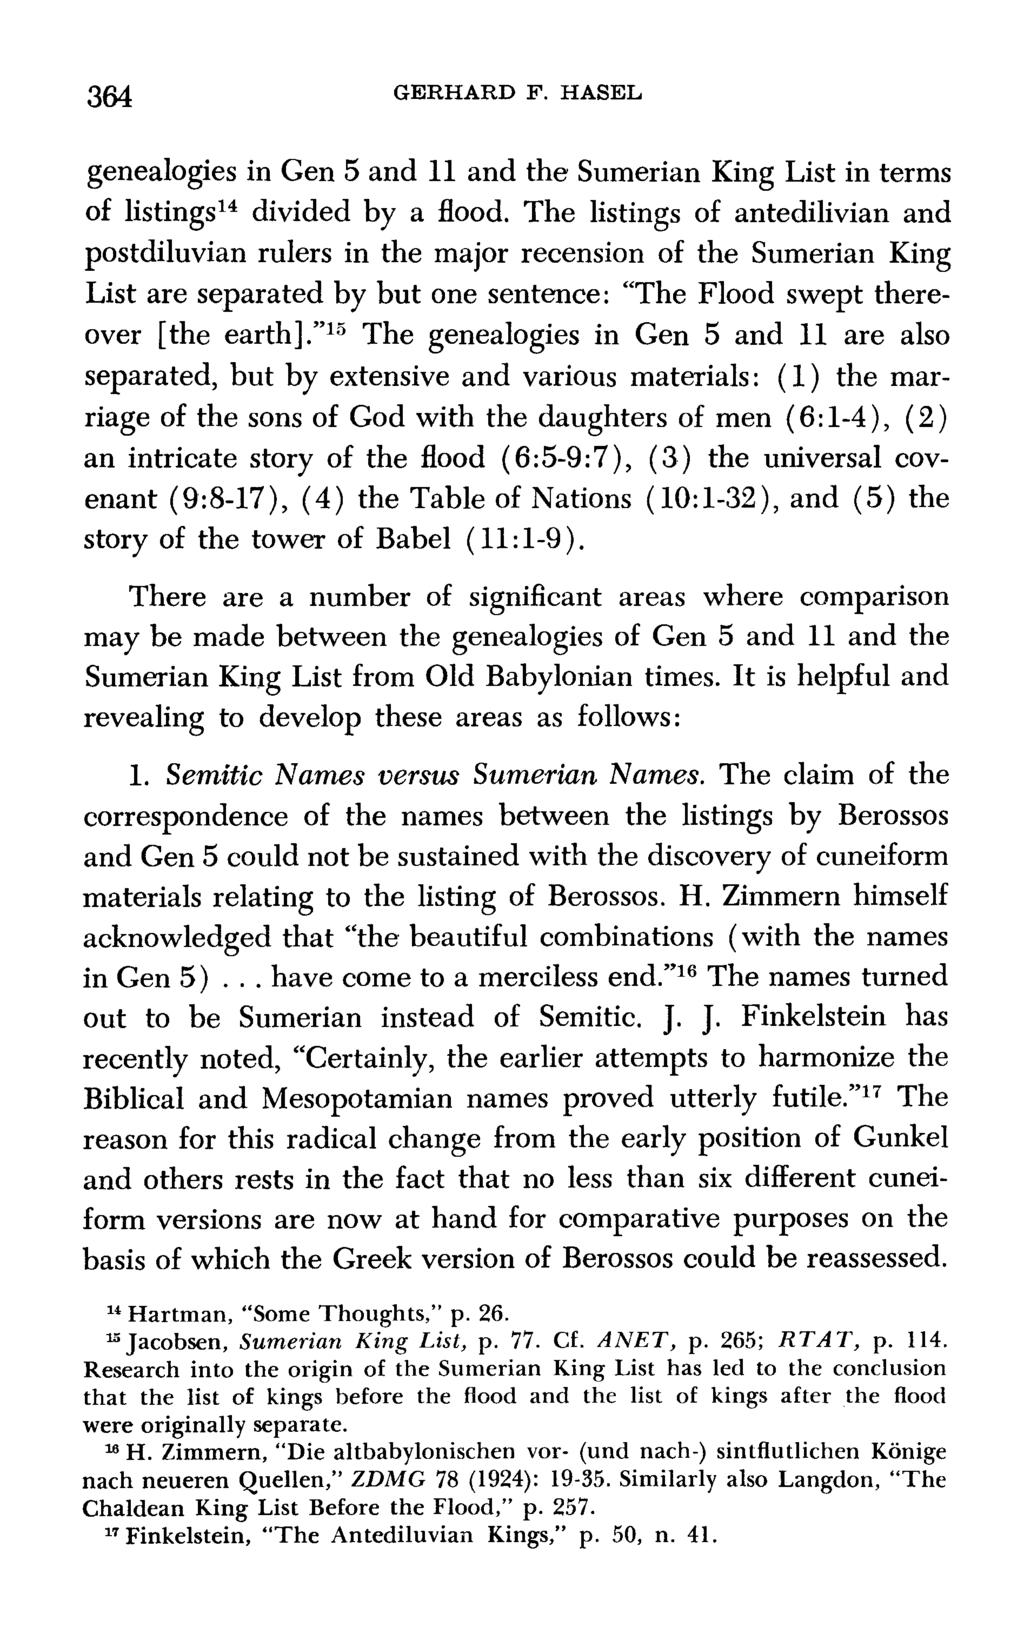 364 GERHARD B. HASEL genealogies in Gen 5 and 11 and the Sumerian King List in terms of listings14 divided by a flood.